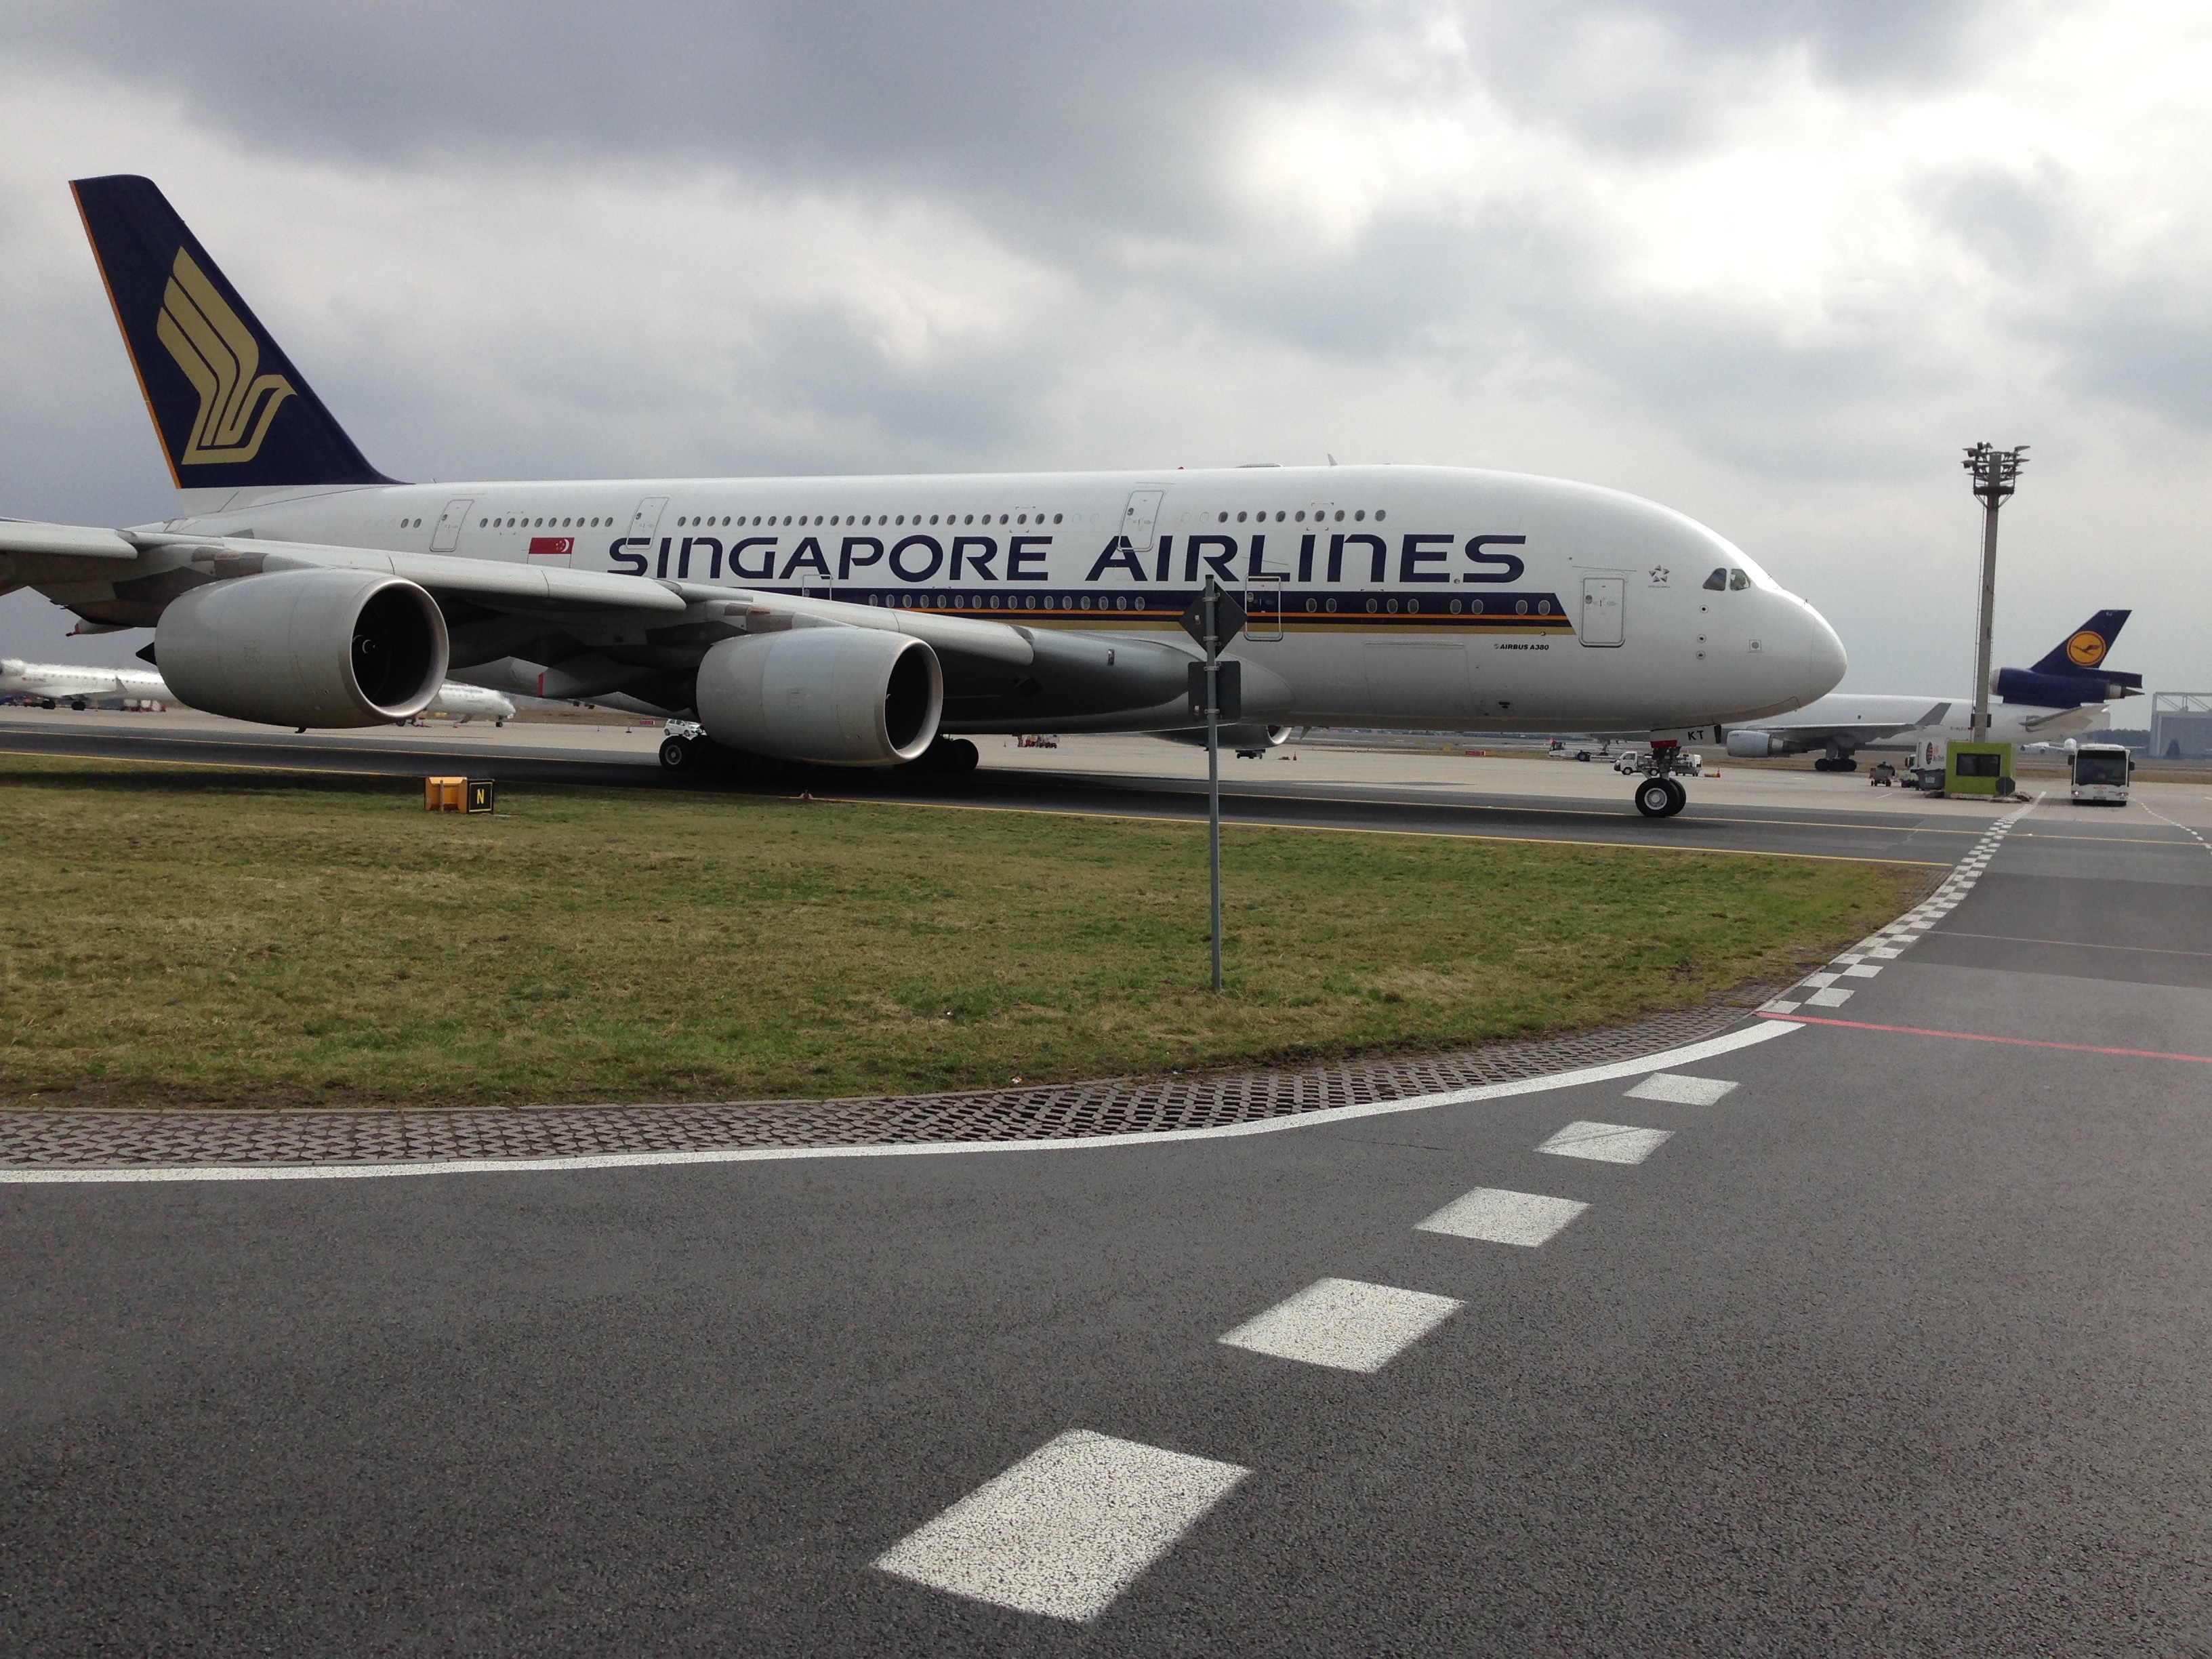 Spotting Singapore Airlines Airbus A380